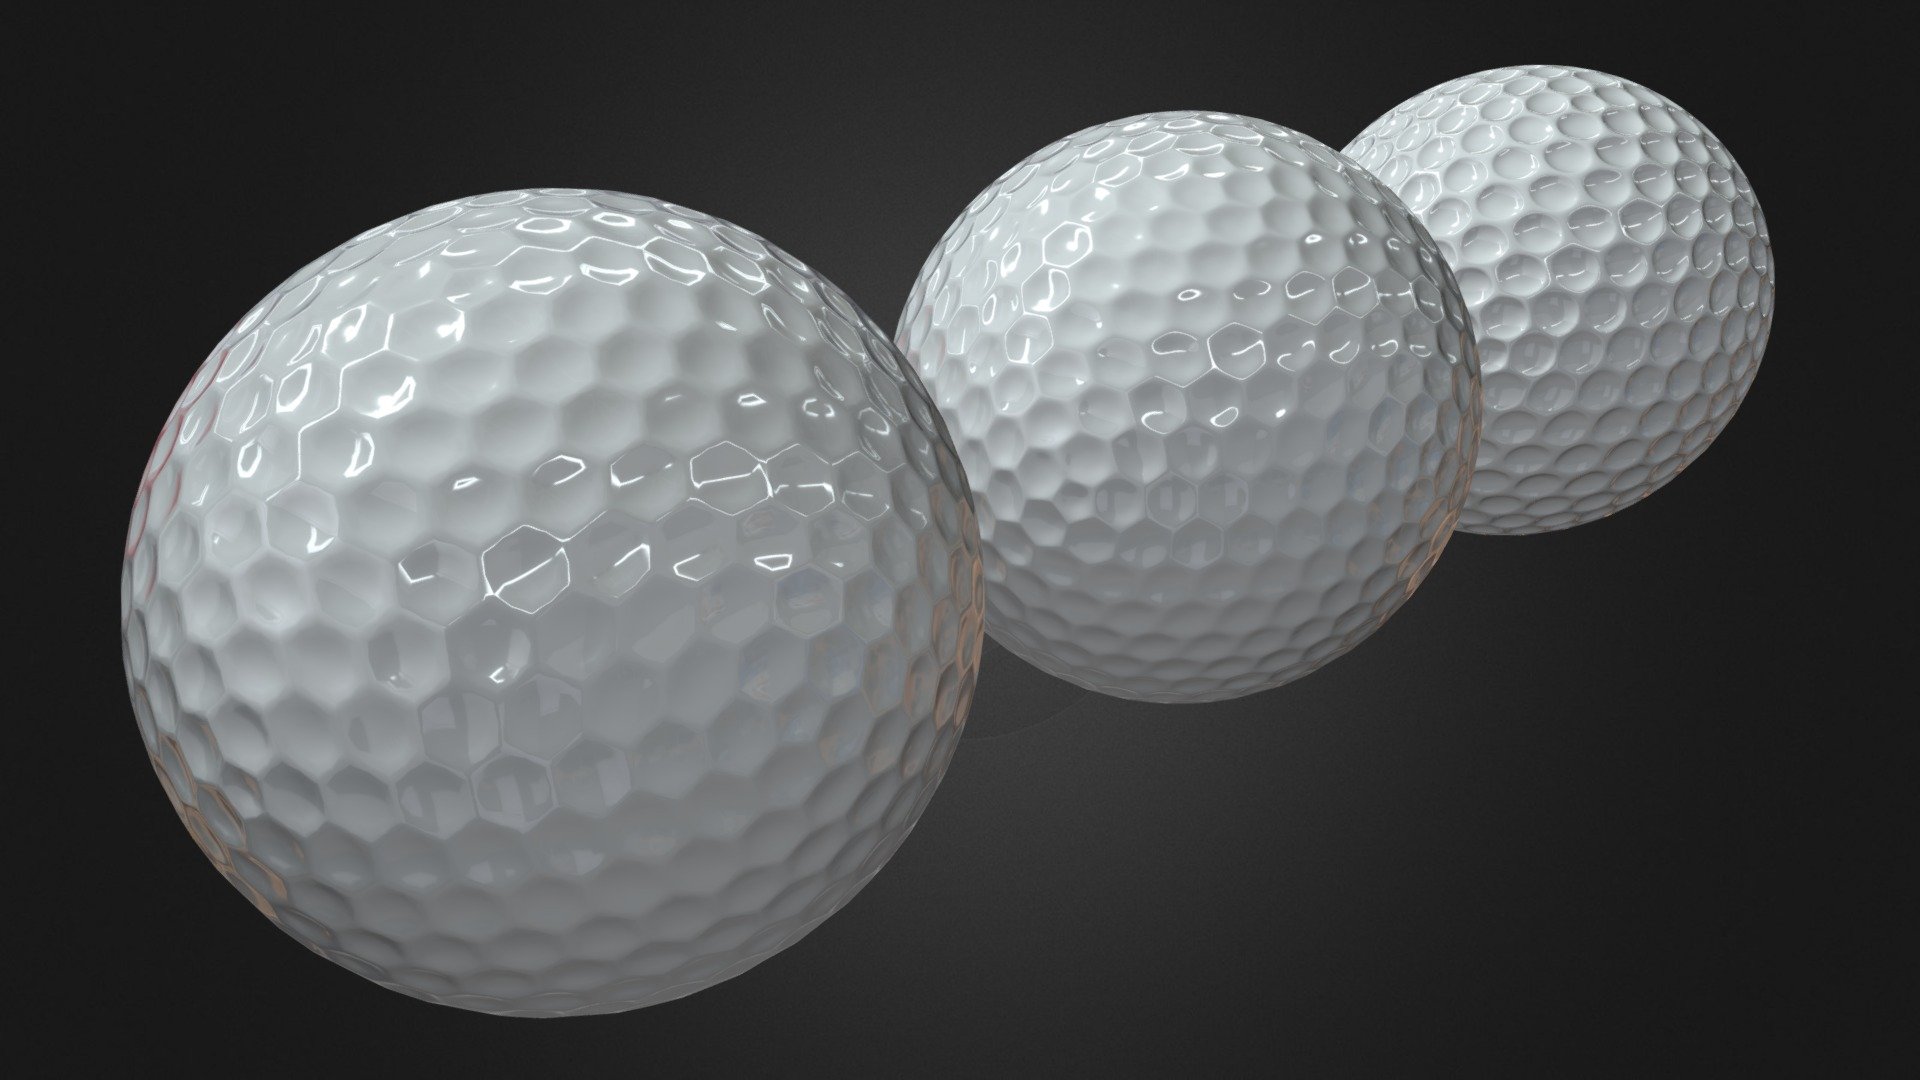 A few golf balls made with different Modifiers in 3ds Max
NURMS Subdivision, Meshsmooth and Turbosmooth

Software: 3ds Max 20 - Golf Ball Variants - Download Free 3D model by Kafu Design (@kufatschgu) 3d model